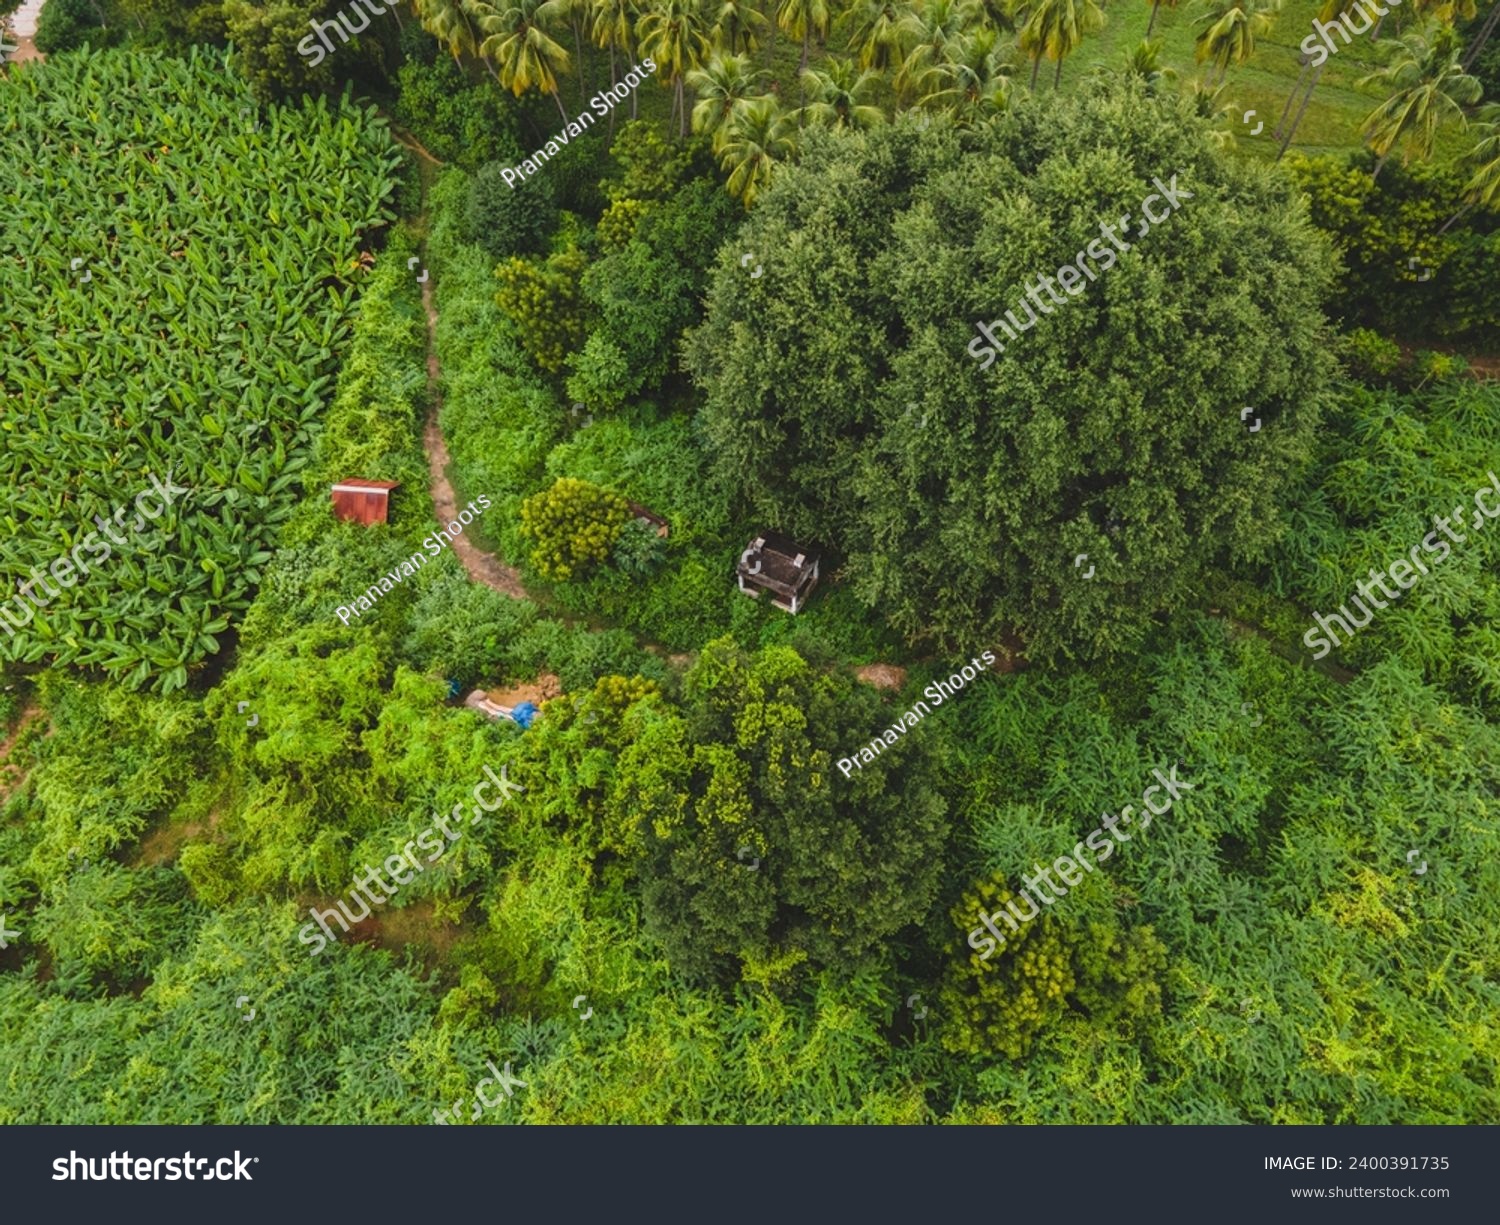 drone shot aerial view top angle greenery natural scenery photograph dense woods lust forest jungle plantations meadows grassland coconut plantain trees india rainforest evergreen wallpaper background #2400391735